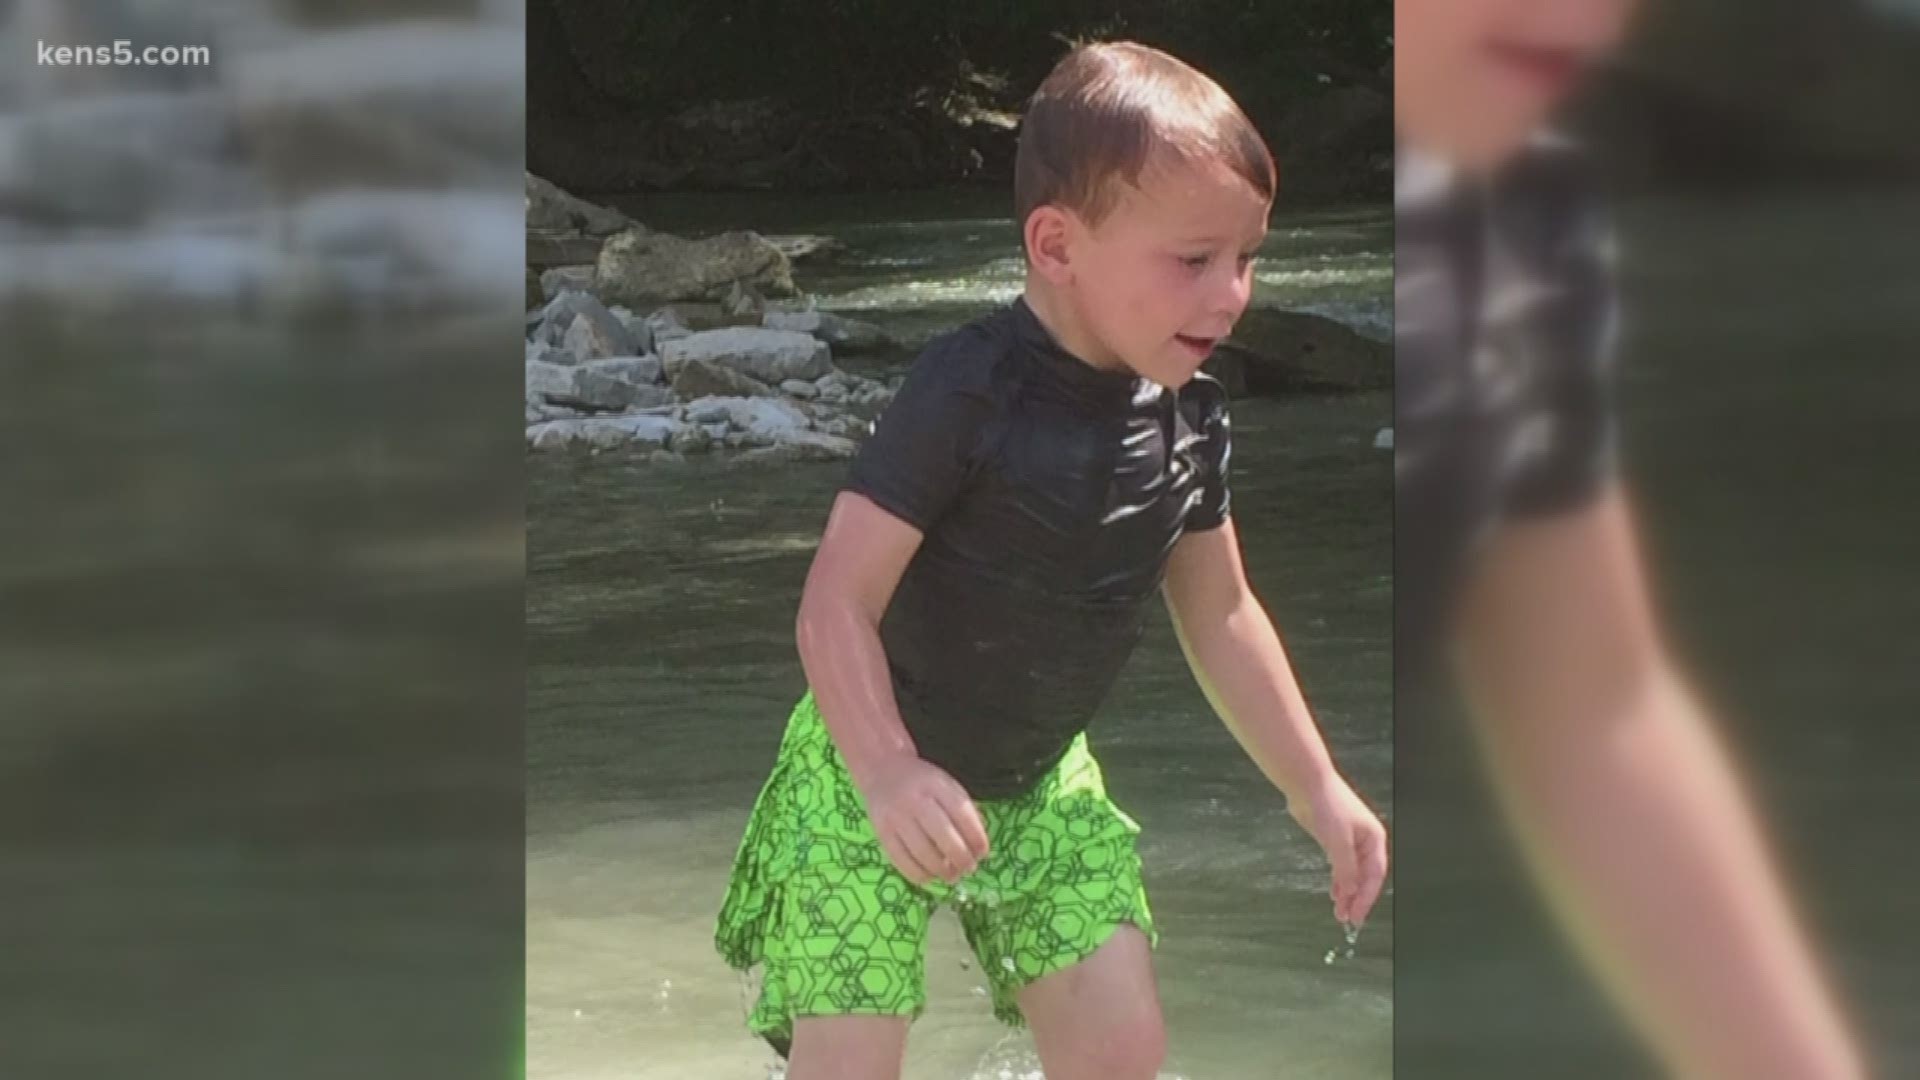 5-year-old Rylan Ward is fighting for his life after he was shot five times in the Sutherland Springs church shooting.